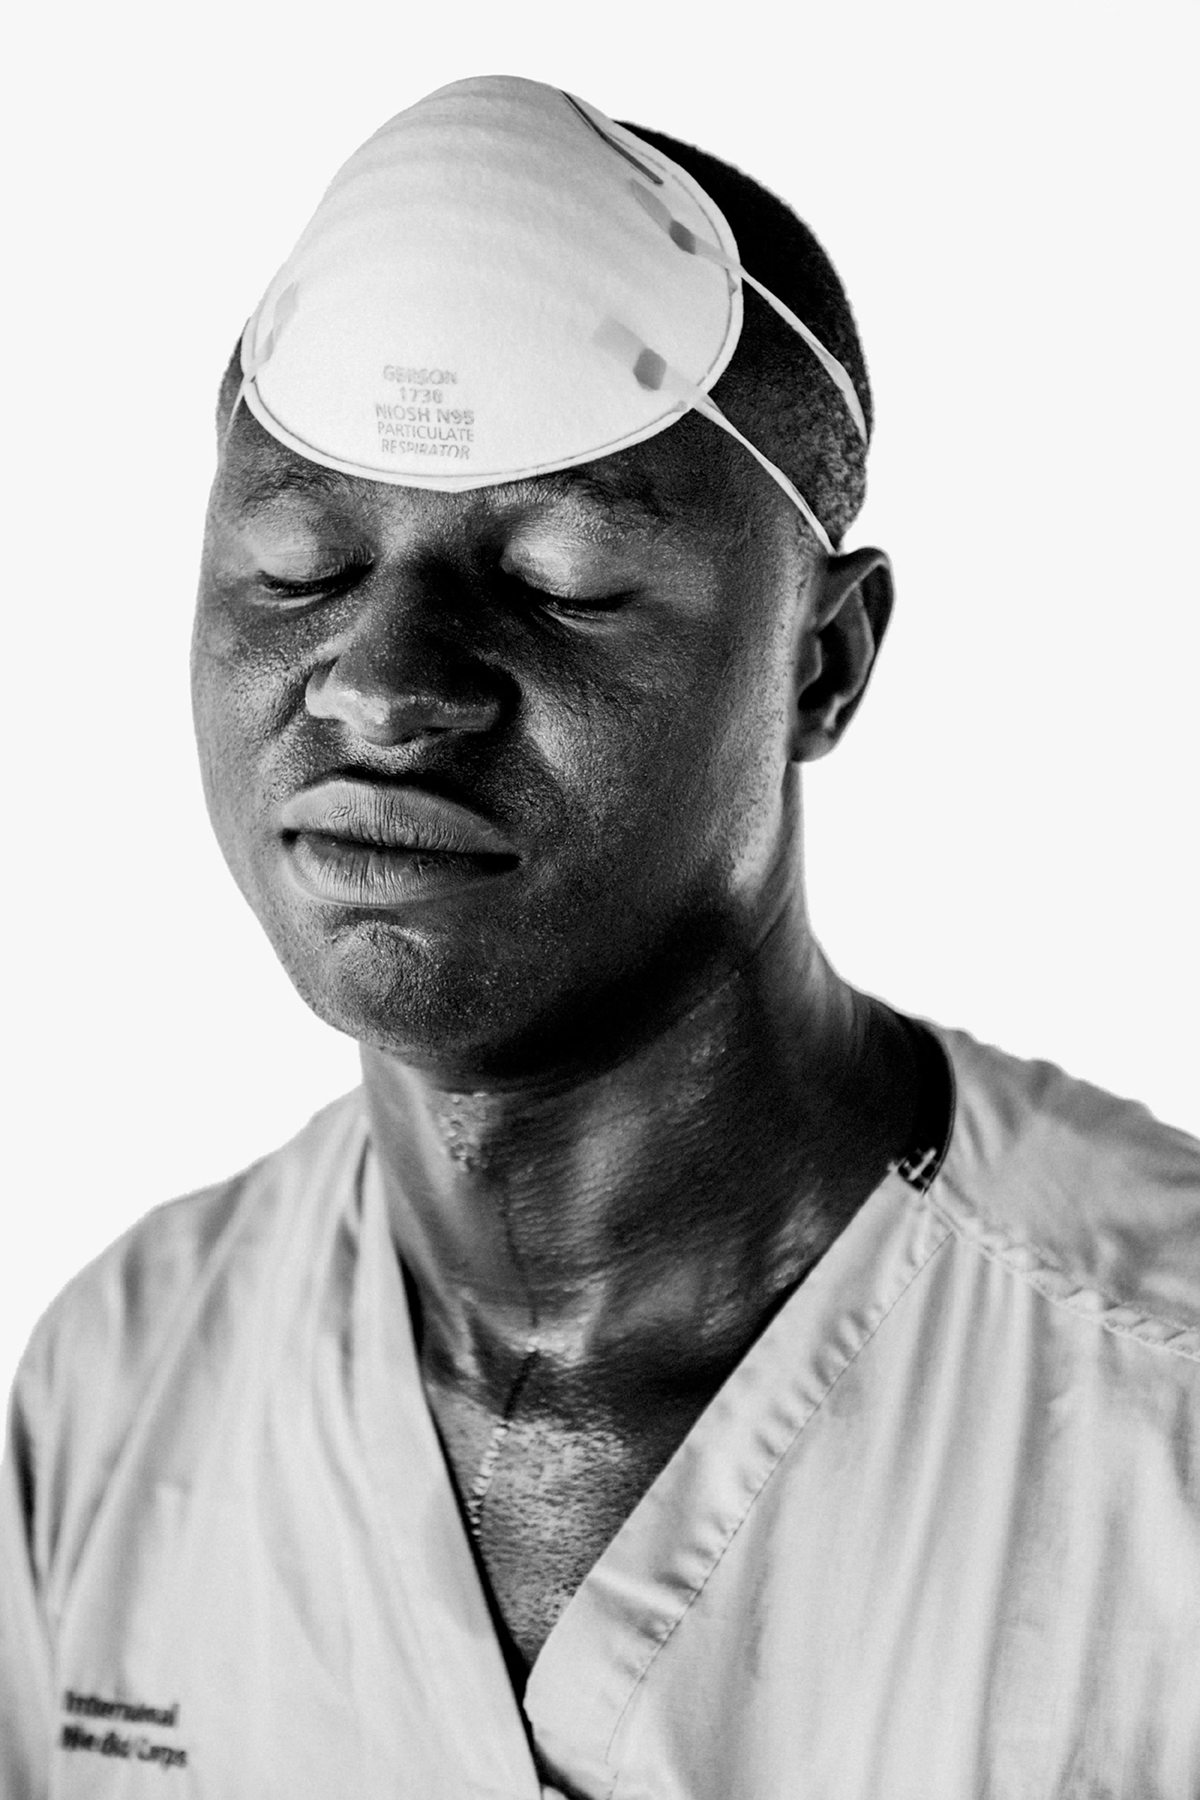  The Ebola crisis that hit West Africa in 2014 has been reported on all over the world, with images of death, sick people and others in hazmat suits.  This gallery is a collection of portraits of the people working out of an Ebola treatment facility 